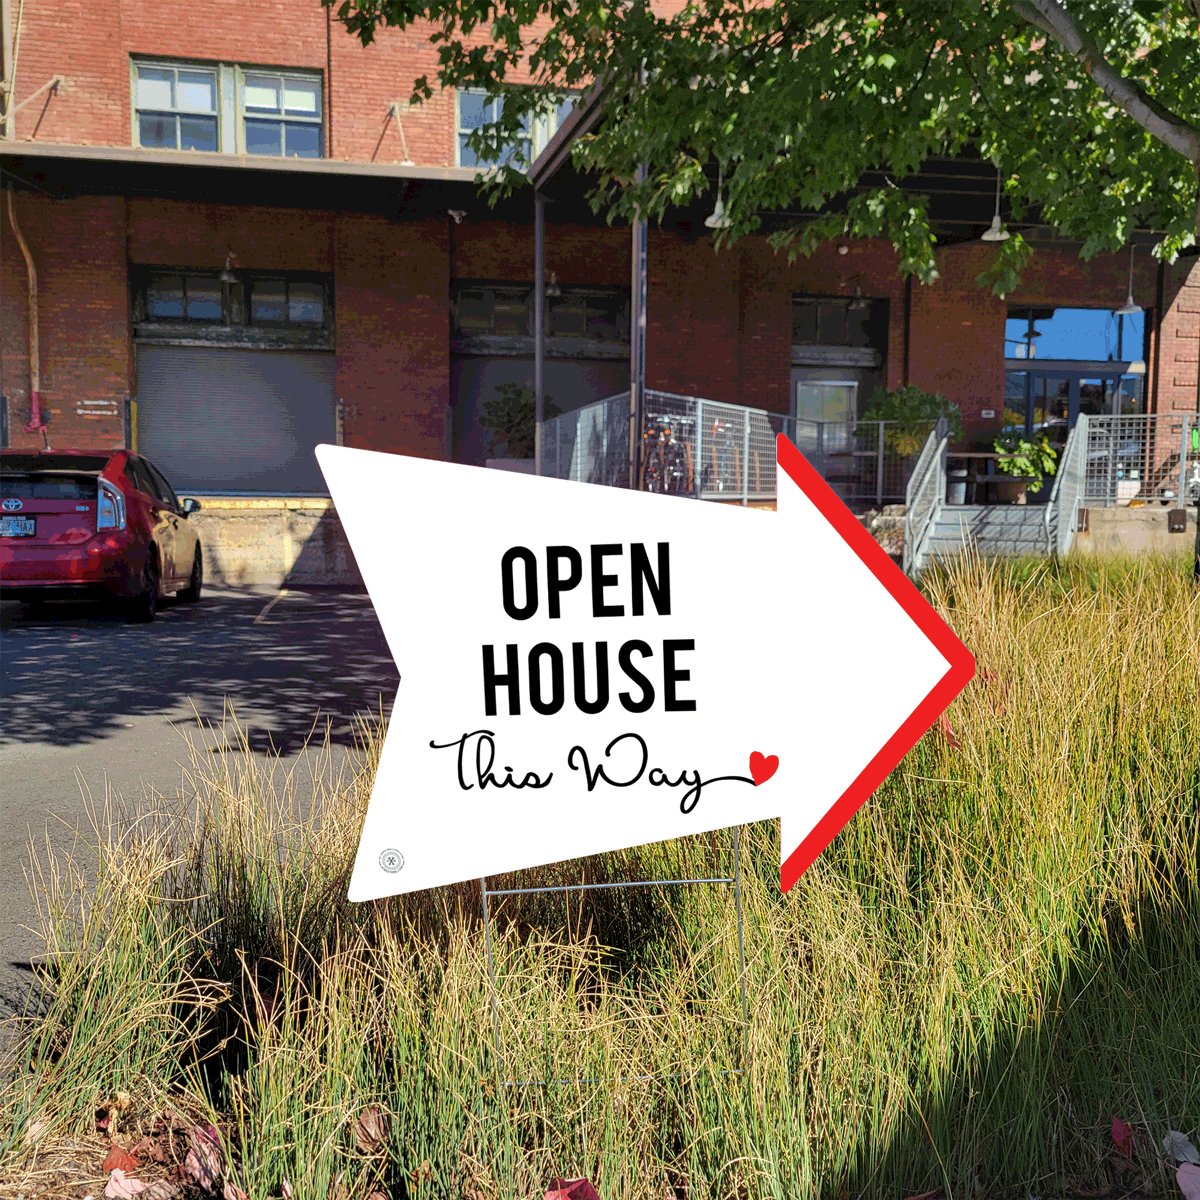 Open House This Way (Cursive) Arrow - All Things Real Estate